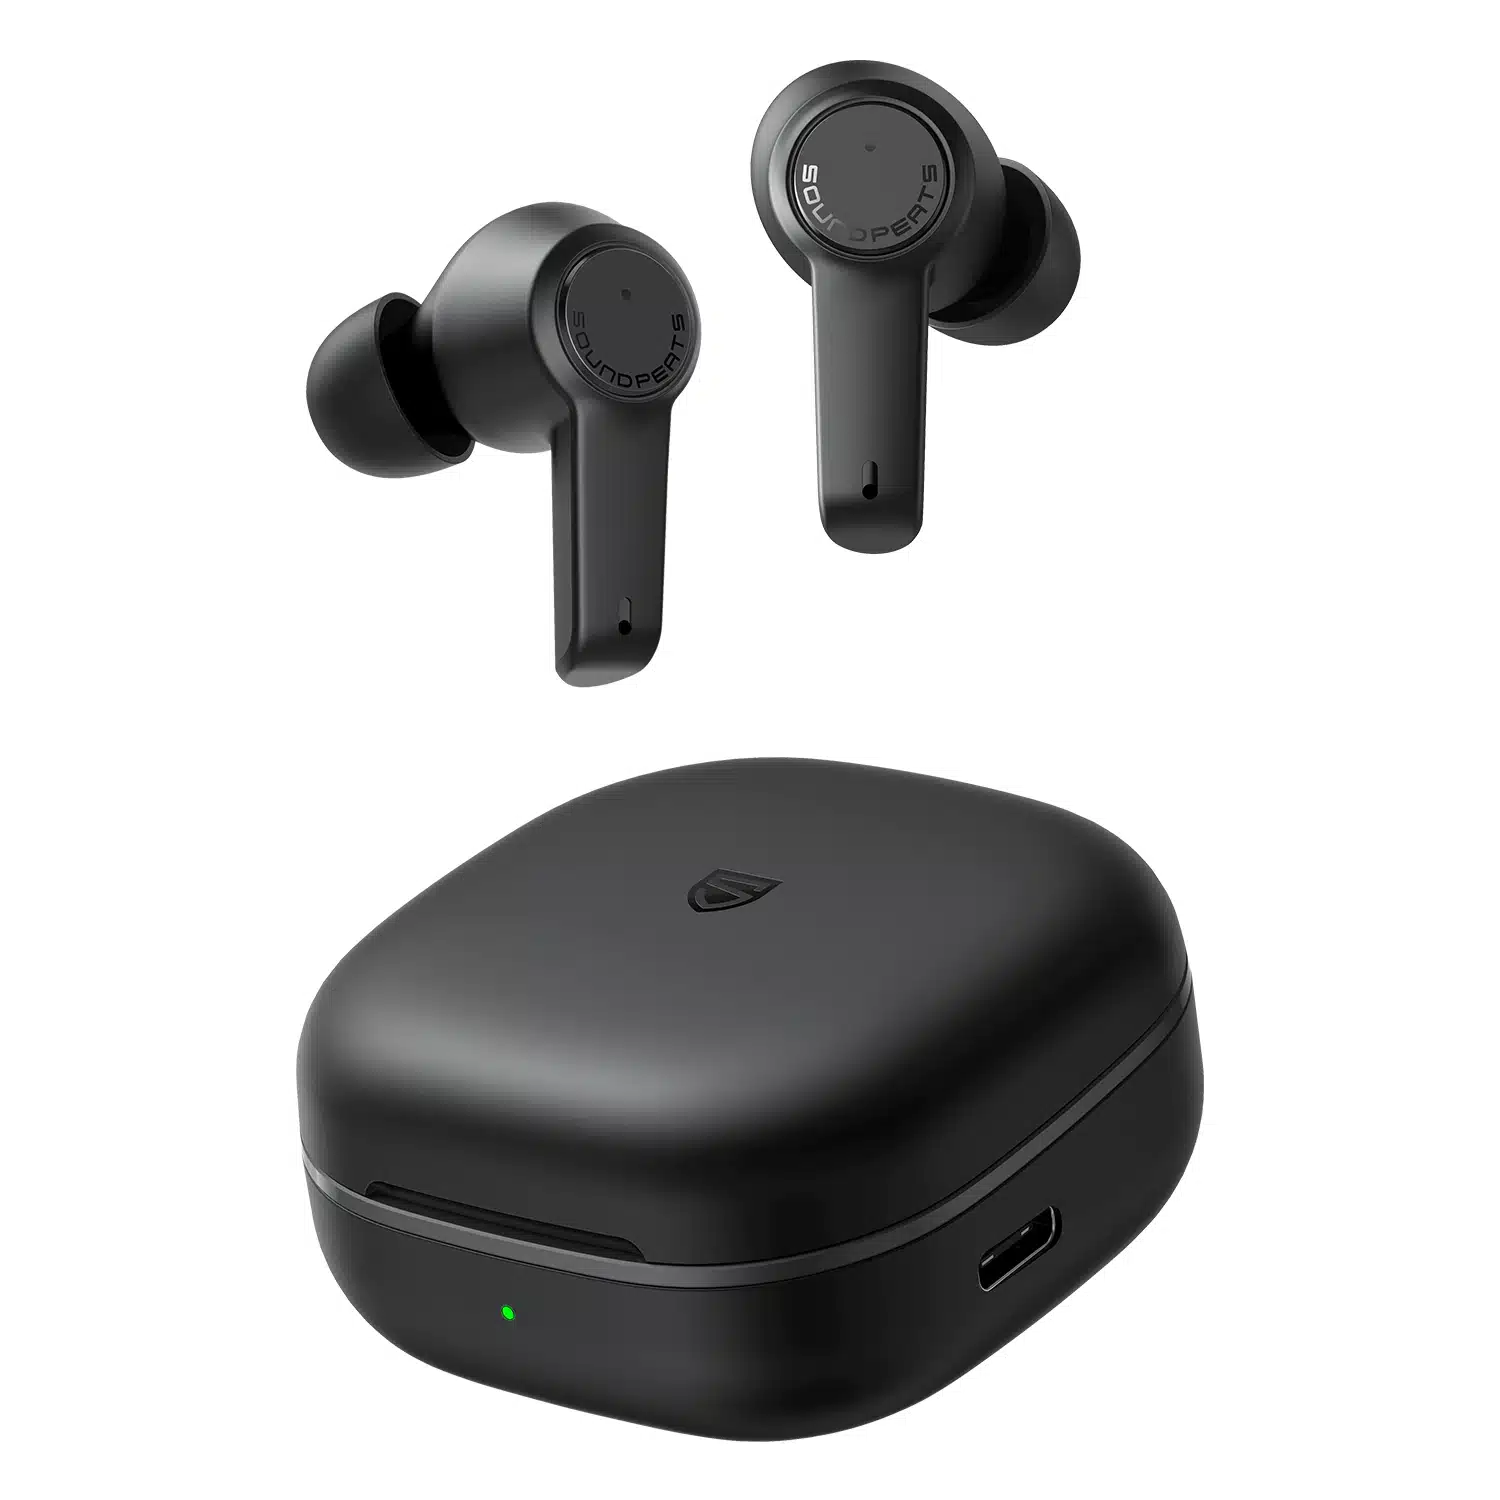 Soundpeats -T3- wireless- headphones- ENC -headphones- bluetooth- 5.2- in -ear- anc- headphones- with -sound+ai- enc- tech-for -Clear- Calls